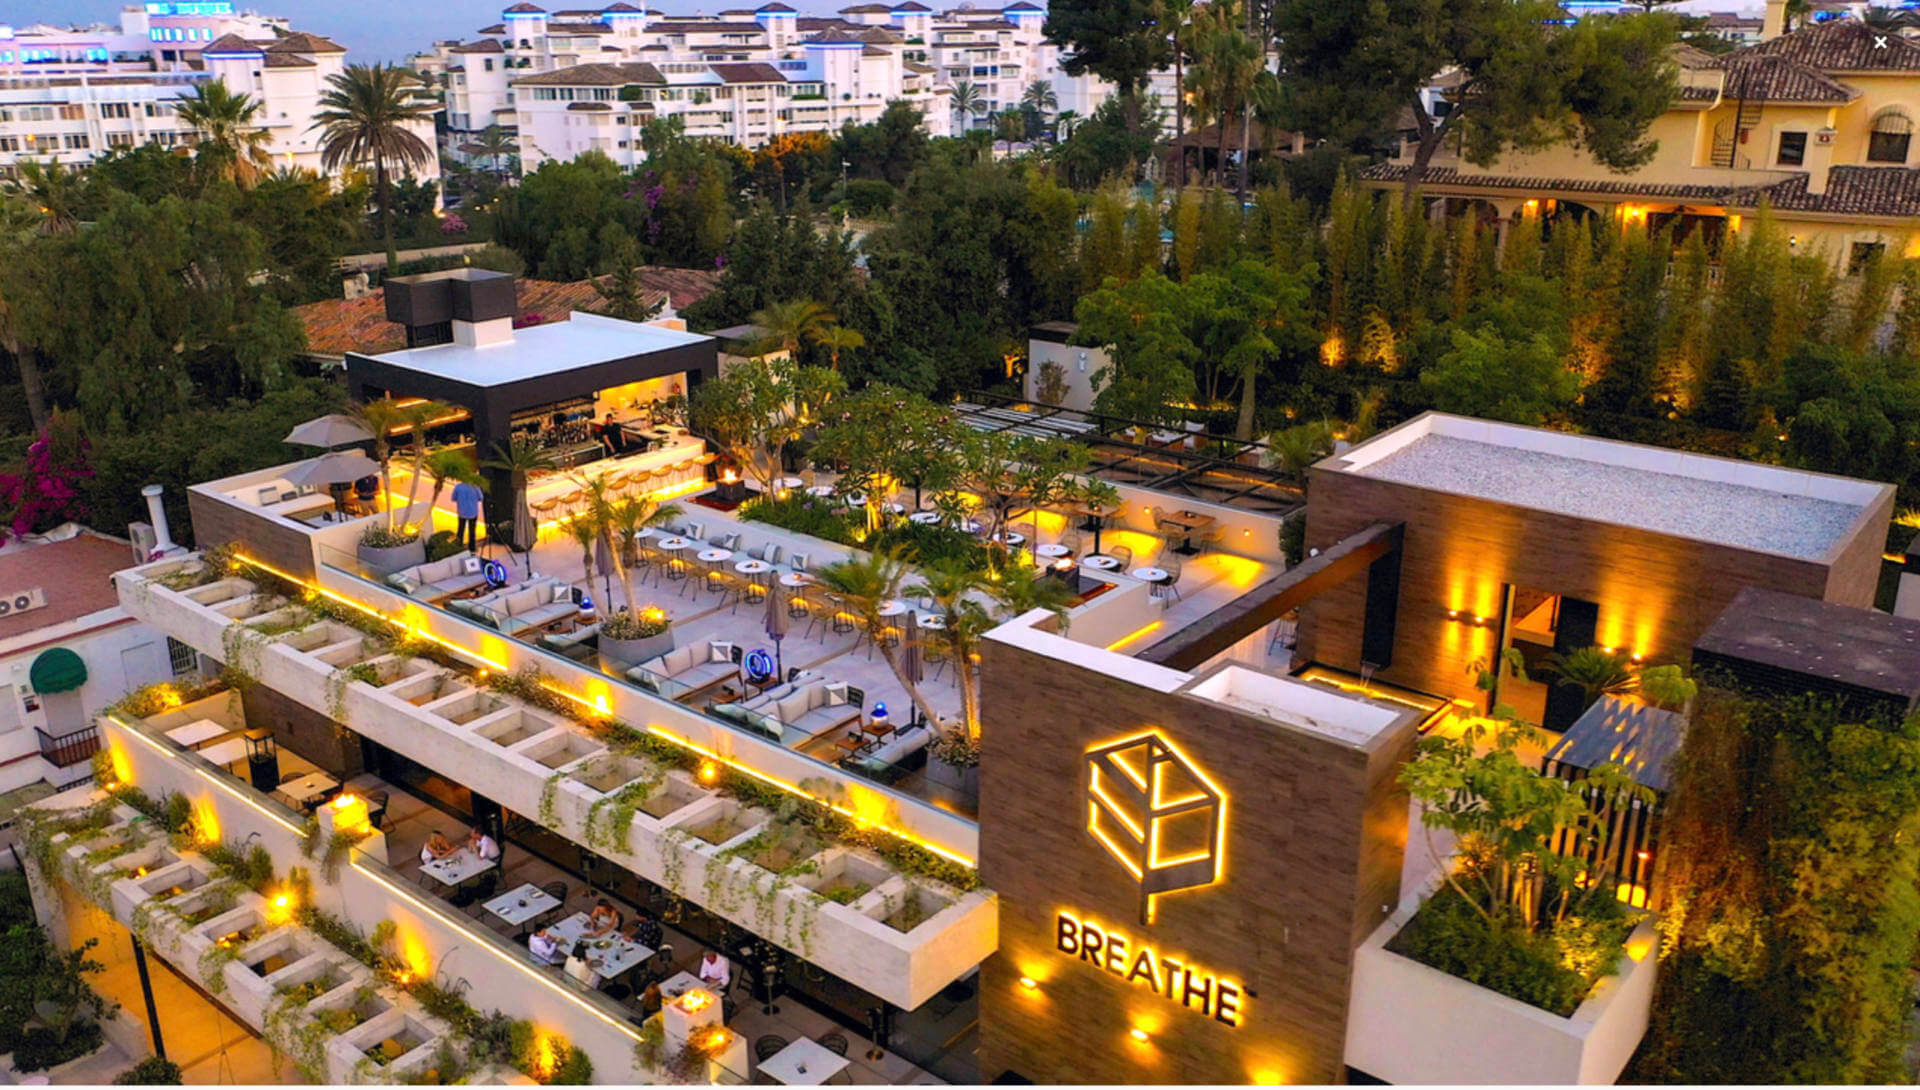 THE GUILD OF SPANISH PROPERTY PROFESSIONALS LAUNCHES AT BREATHE RESTAURANT IN MARBELLA